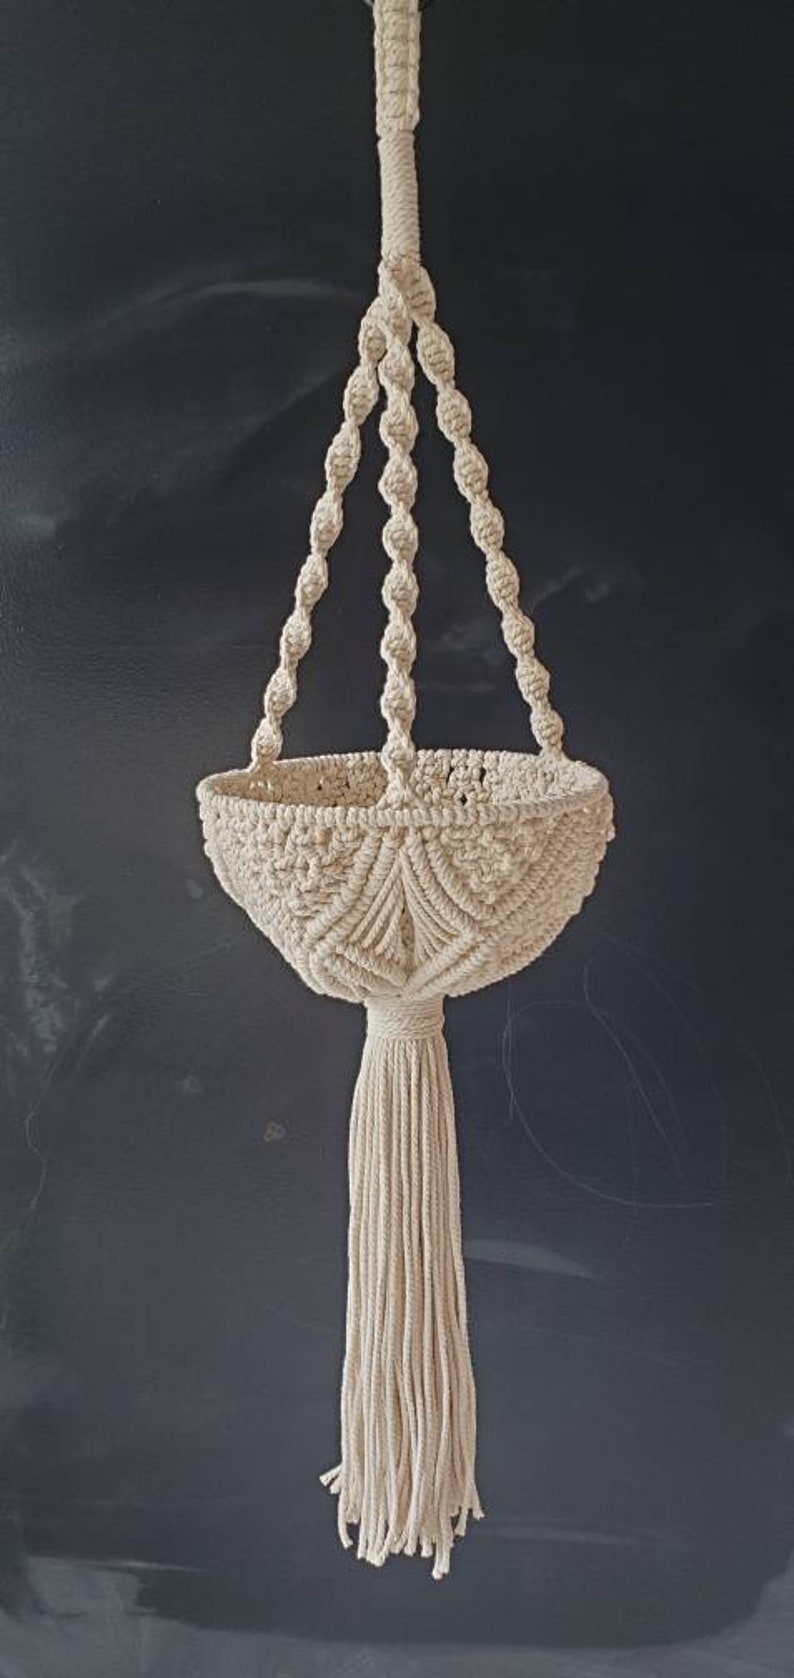 Macrame Fruit Basket Pattern Macrame Hanging Planter PDF Tutorial with pictures, step-by-step guide and knot guide for beginners image 3